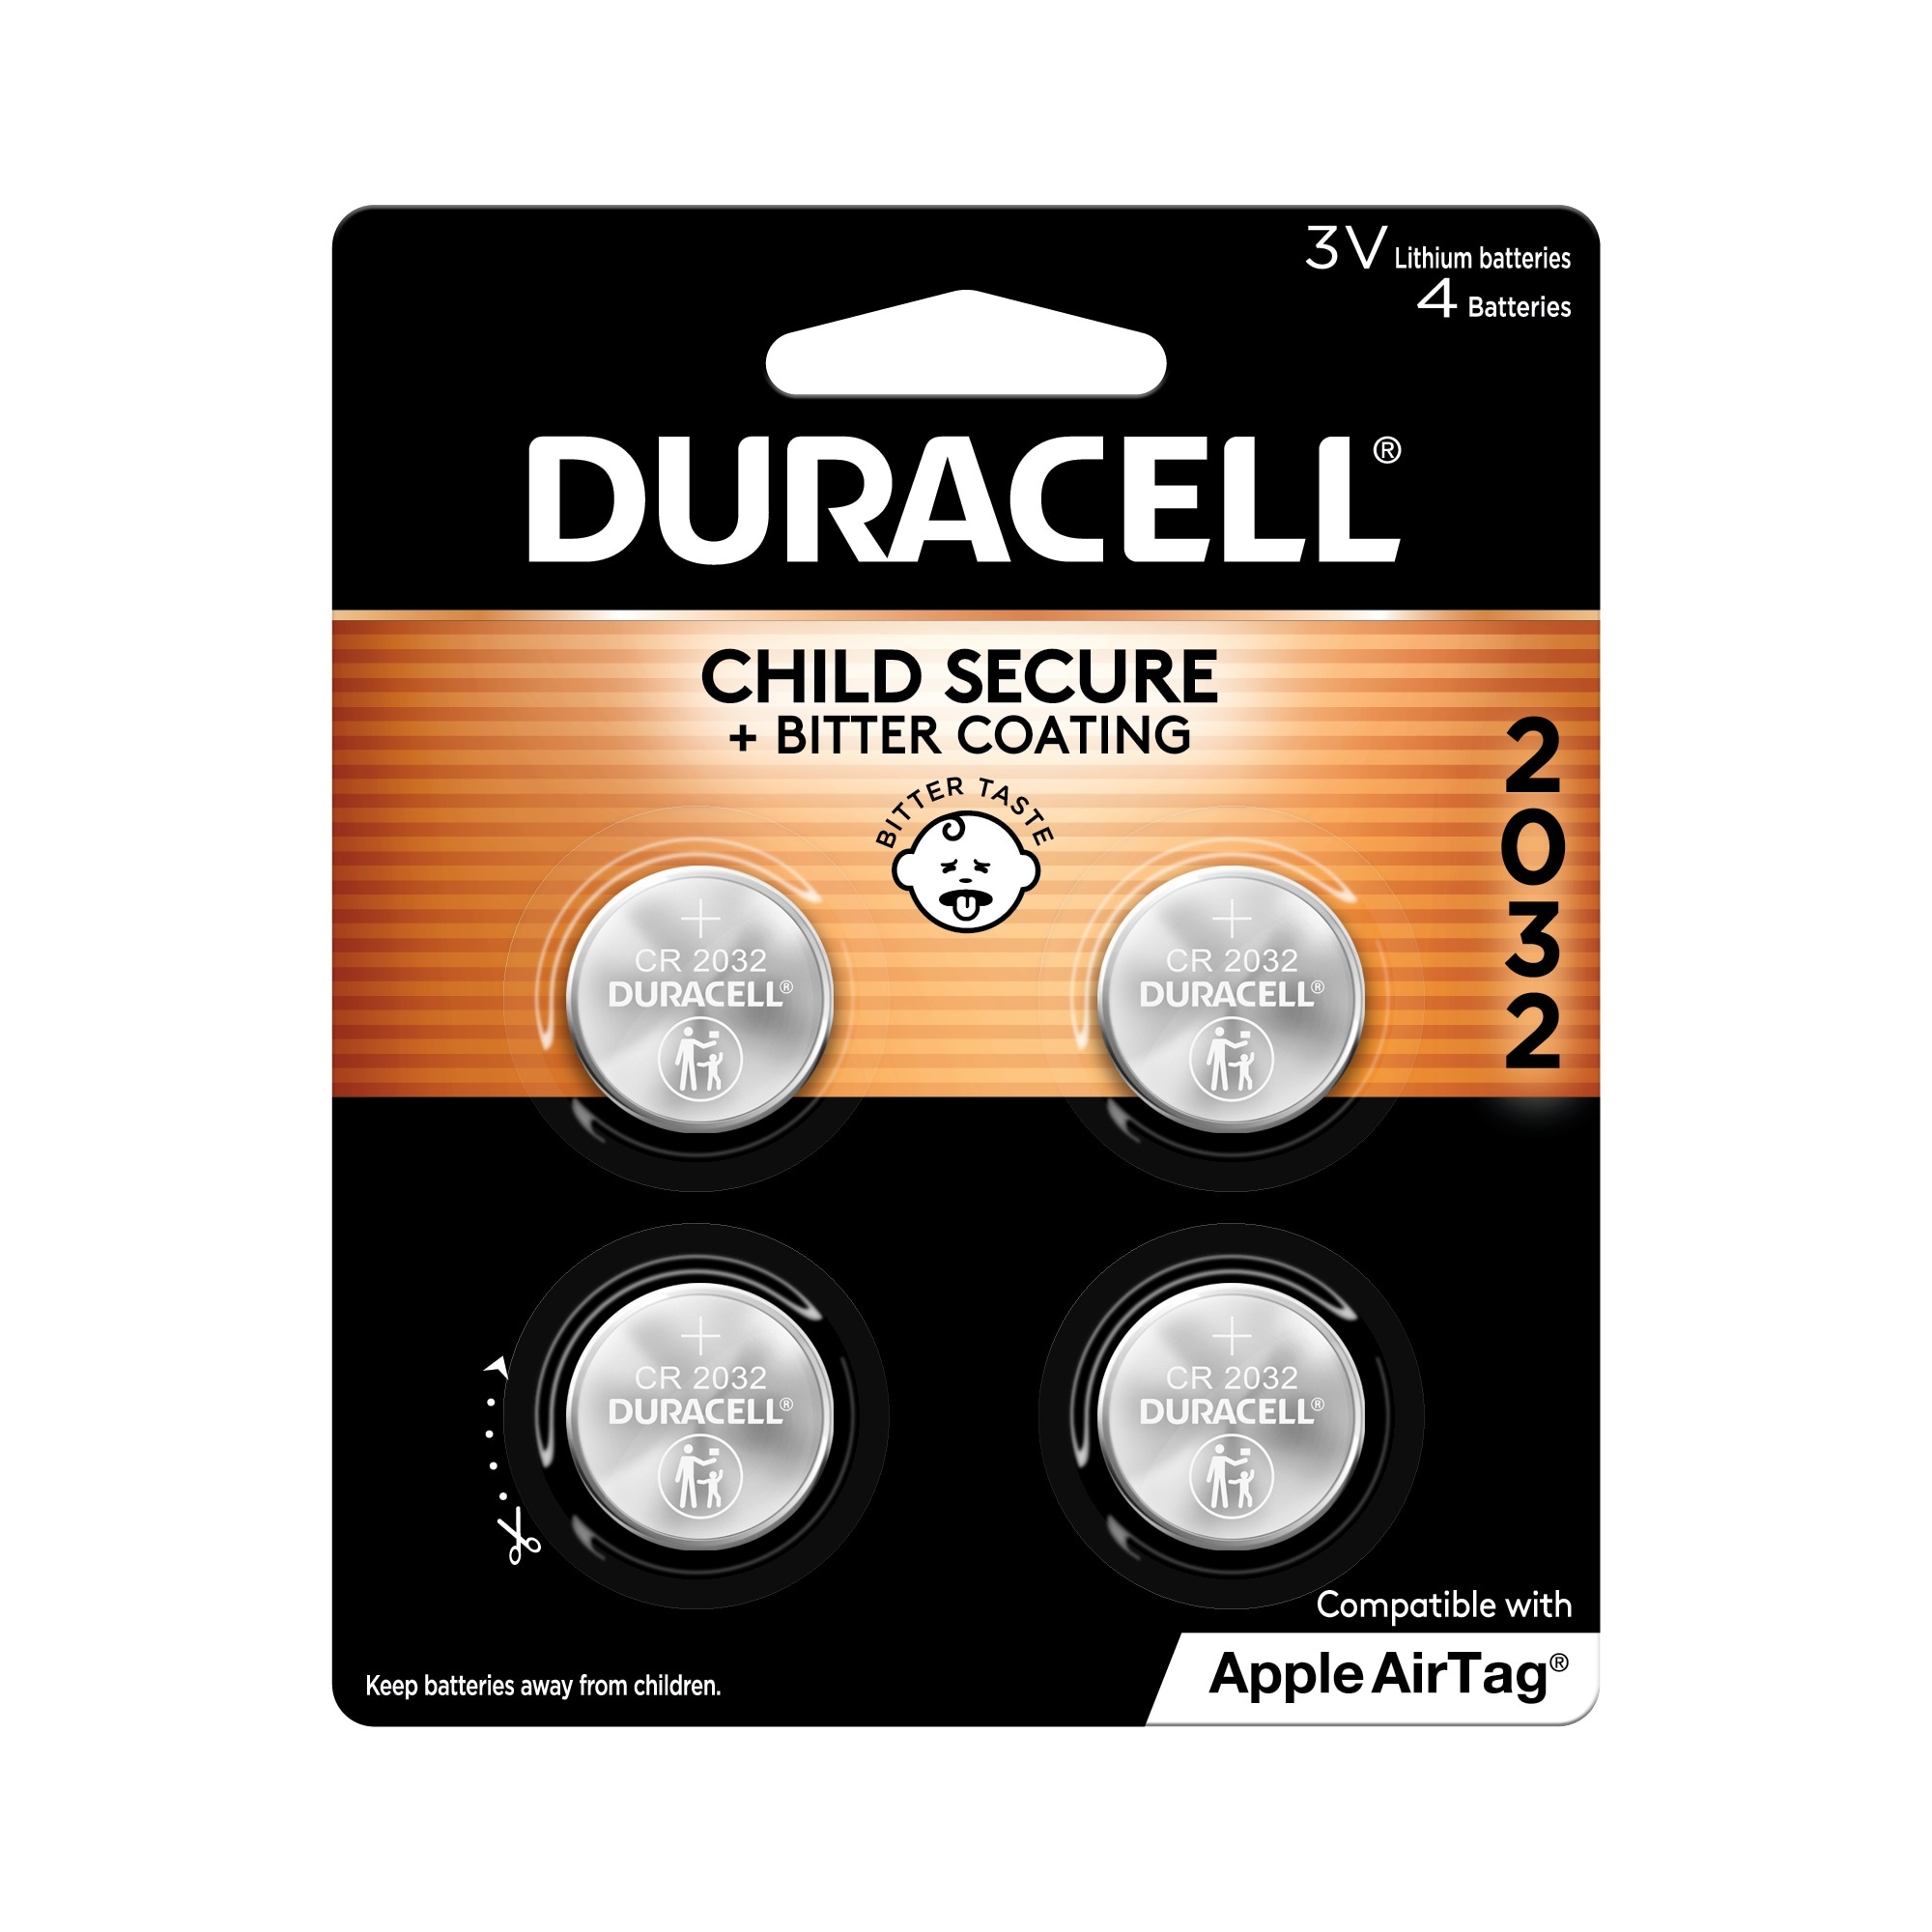 Duracell Lithium CR2032 Coin Batteries (4-Pack) in the Coin